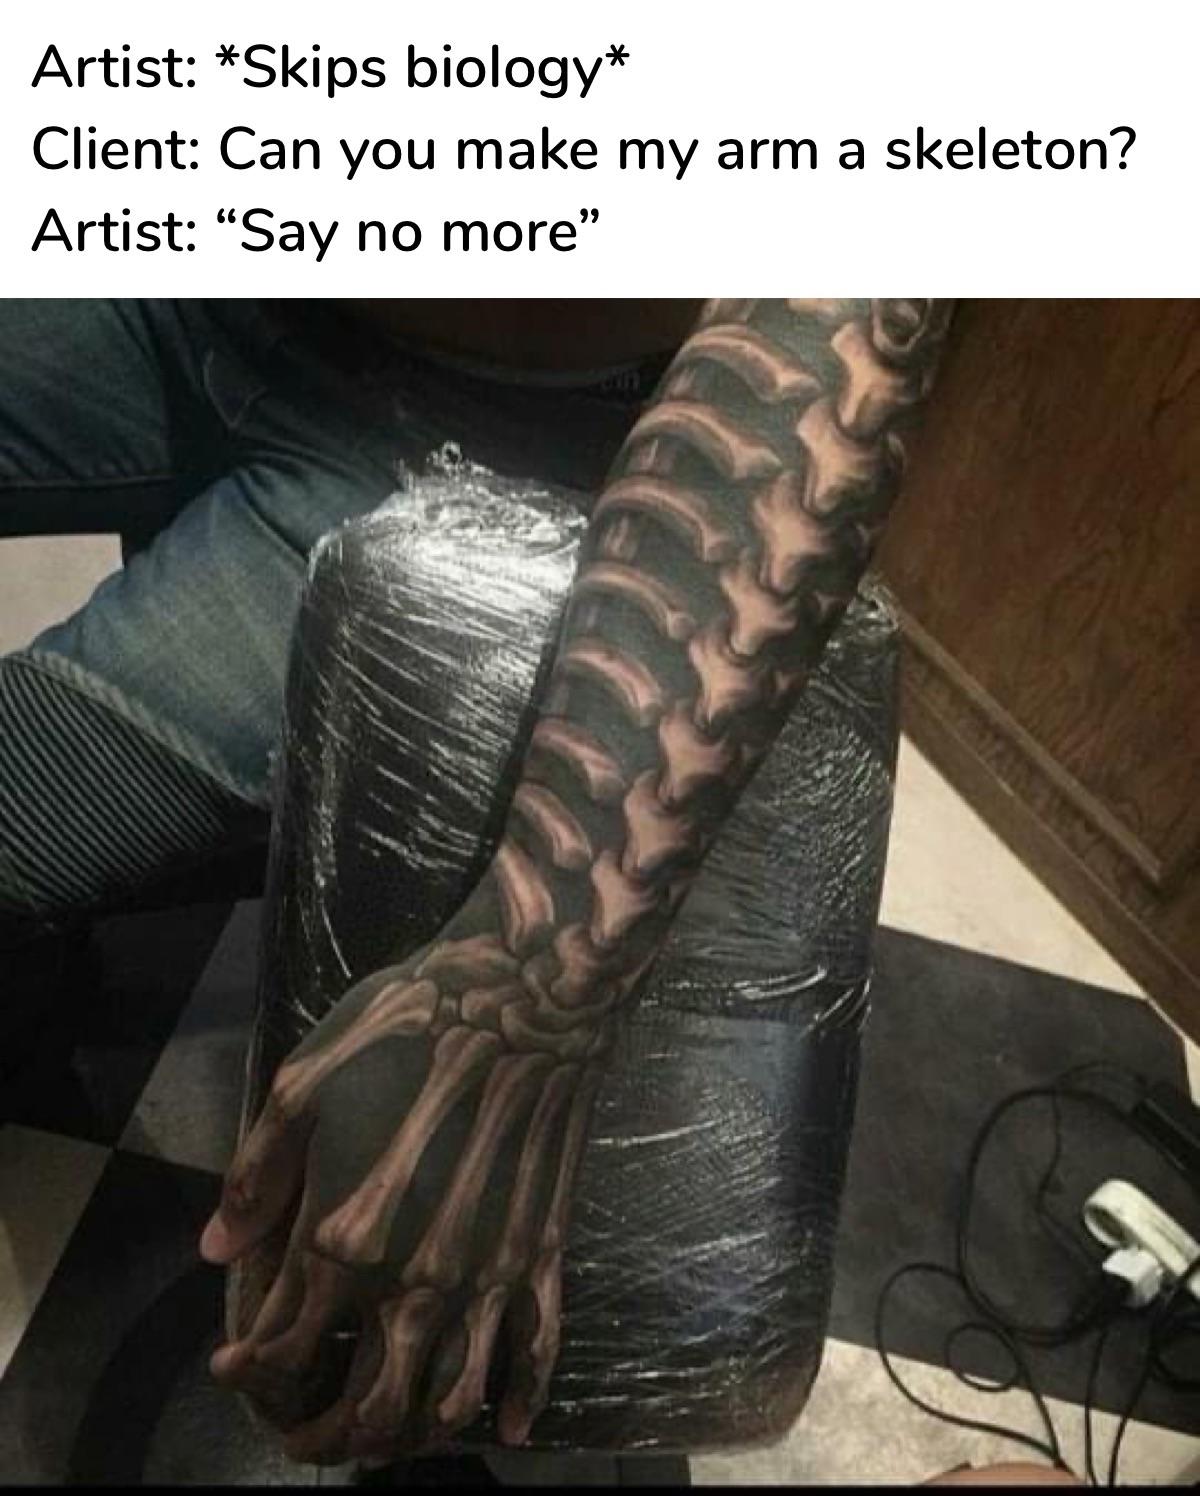 hand tattoo for men - Artist Skips biology Client Can you make my arm a skeleton? Artist Say no more